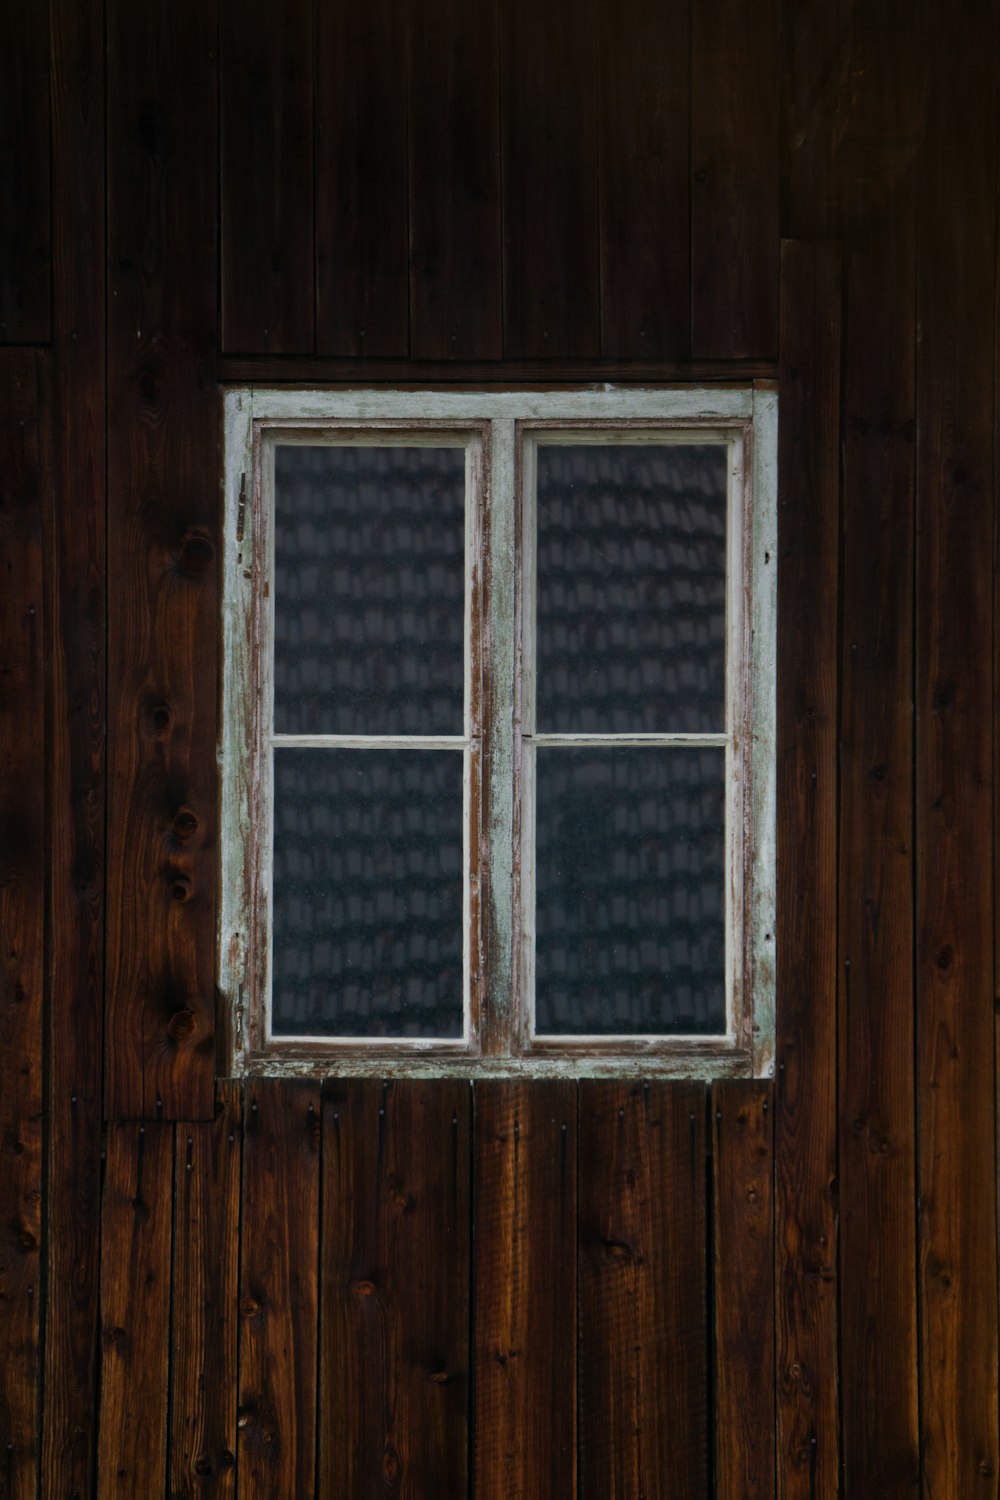 a window on a wooden wall with a bench in front of it